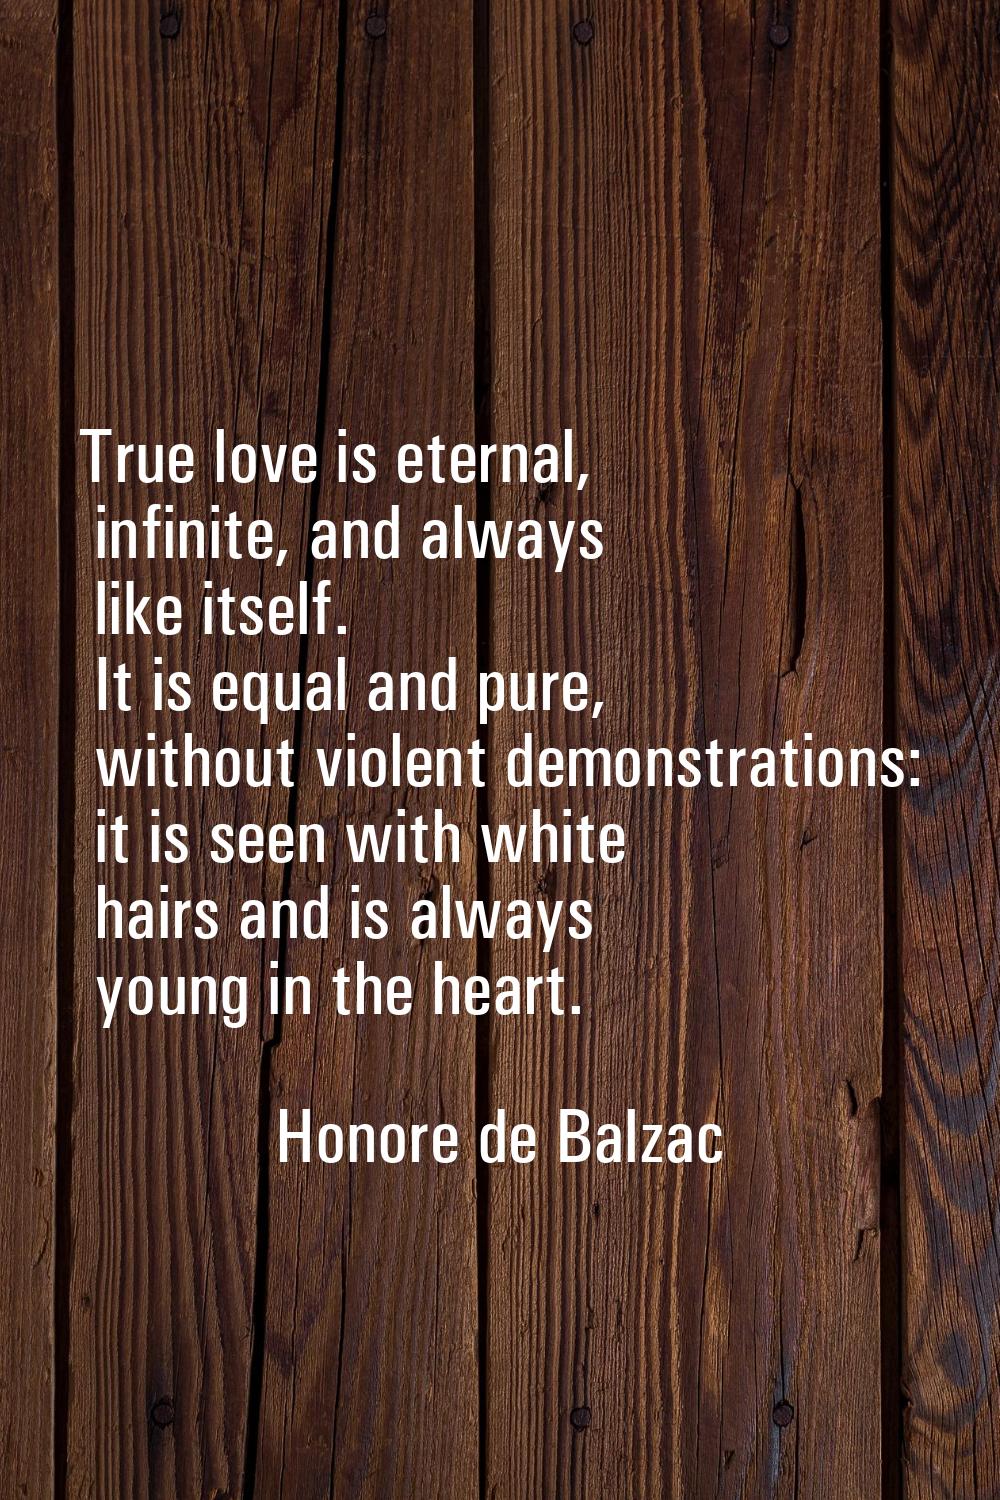 True love is eternal, infinite, and always like itself. It is equal and pure, without violent demon